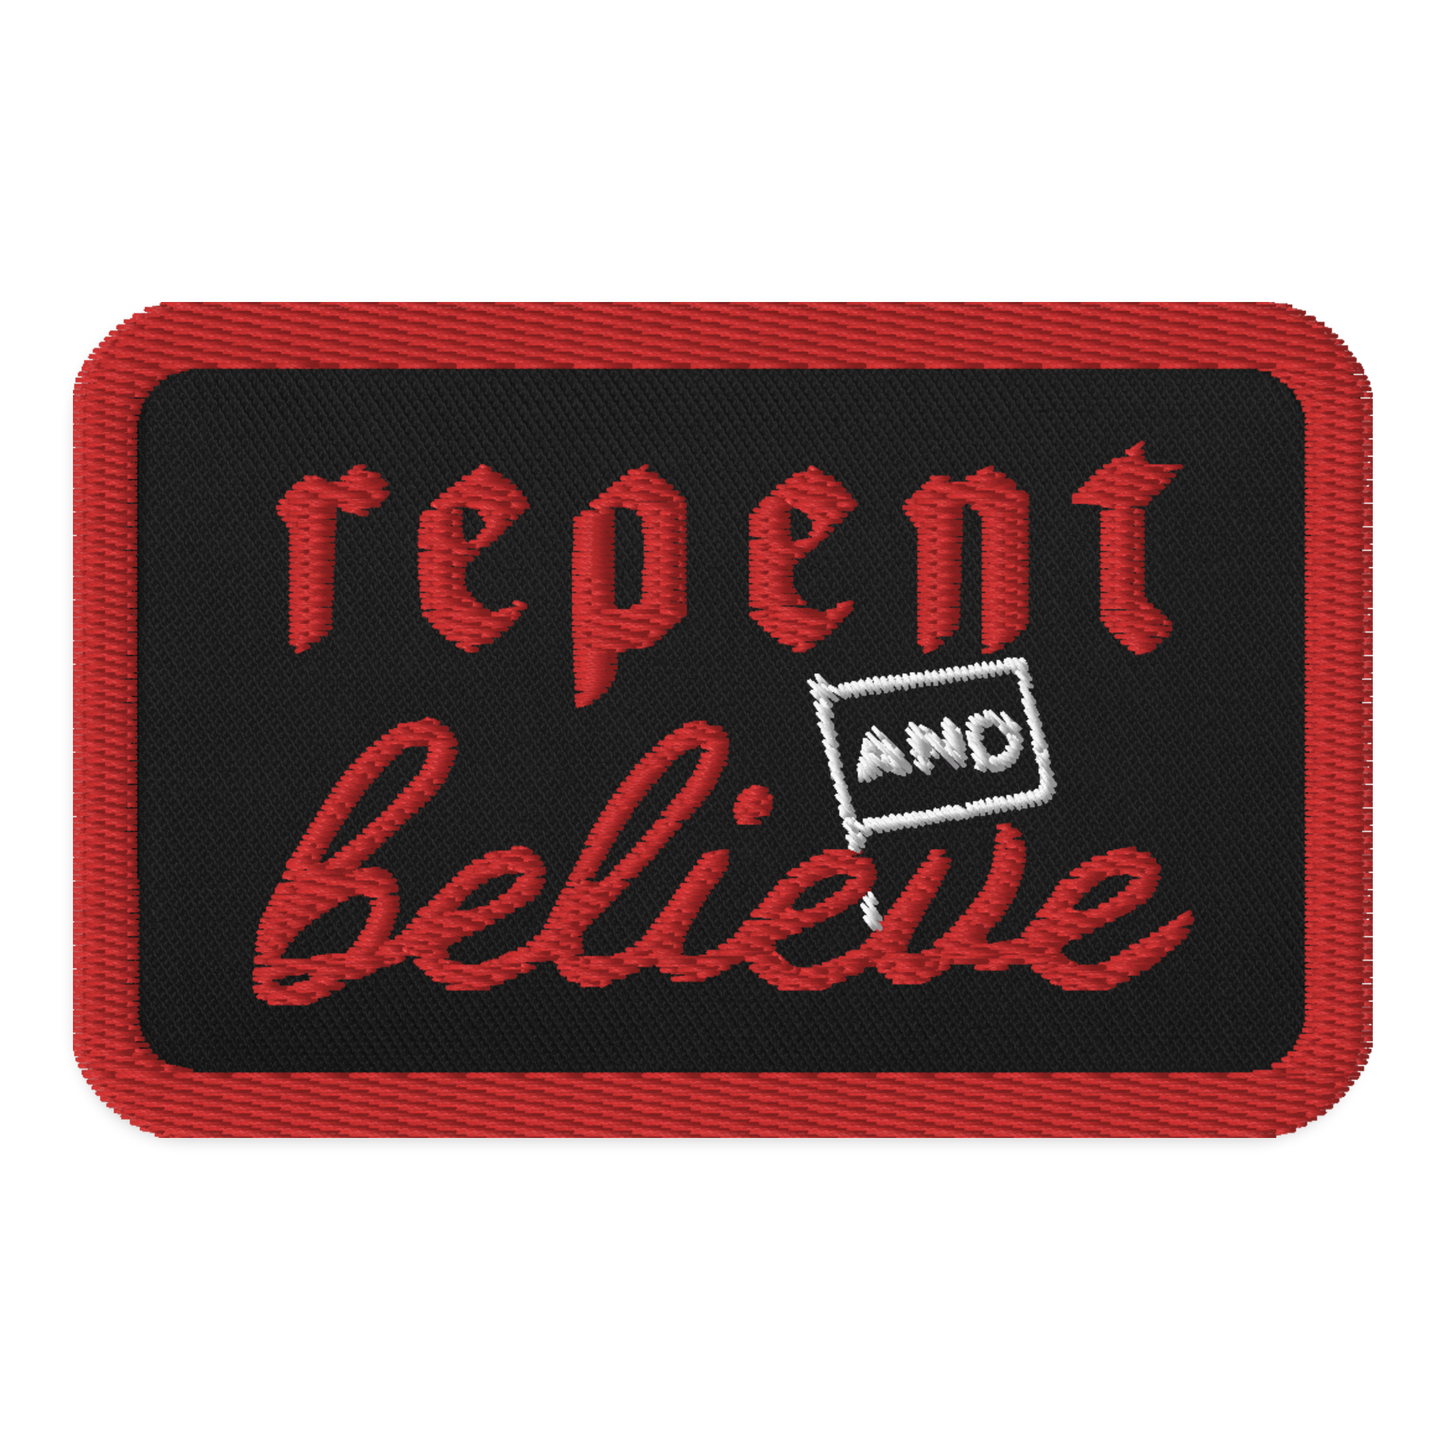 Repent and Believe Patch